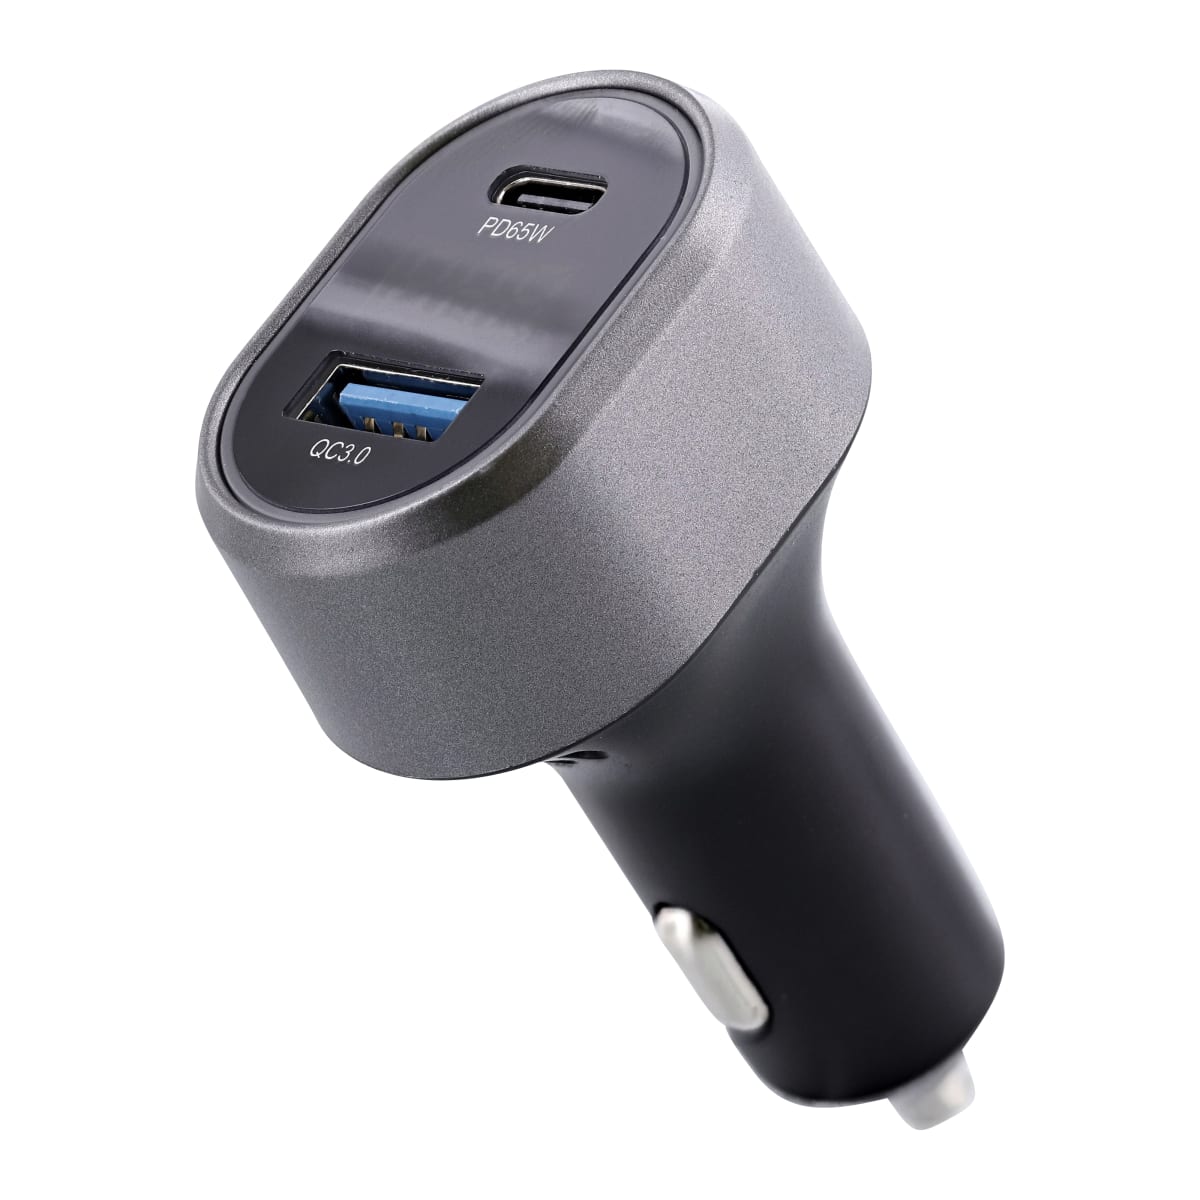 Chargeur allume-cigare 1XUSB-A 18W quick charge - T'nB